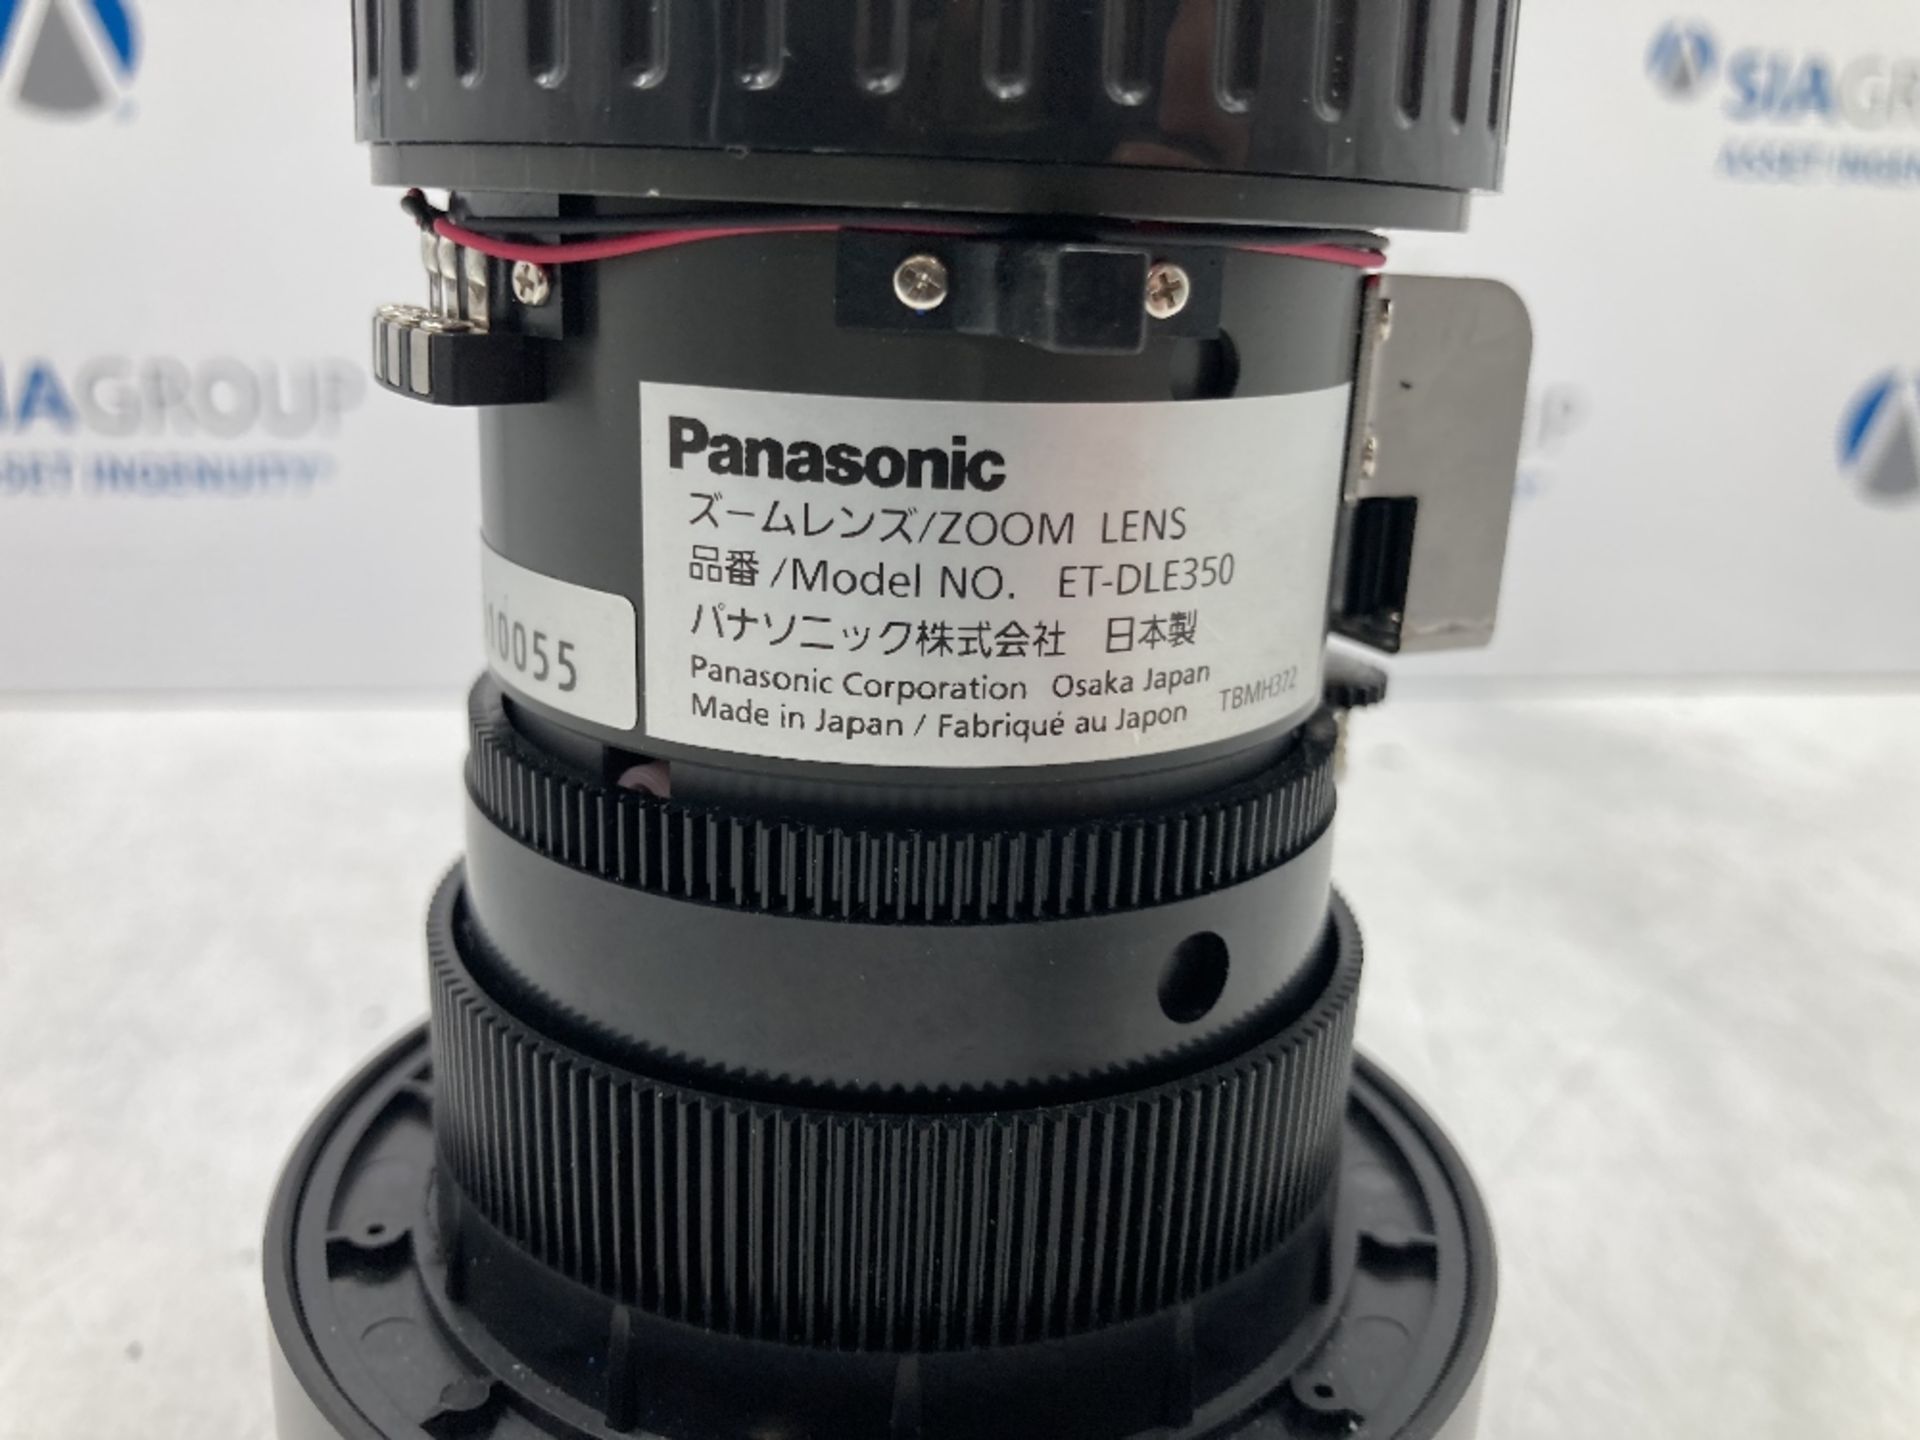 Panasonic ET DLE350 3.6-5.4:1 Zoom Lens With Carrier Case - Image 4 of 8